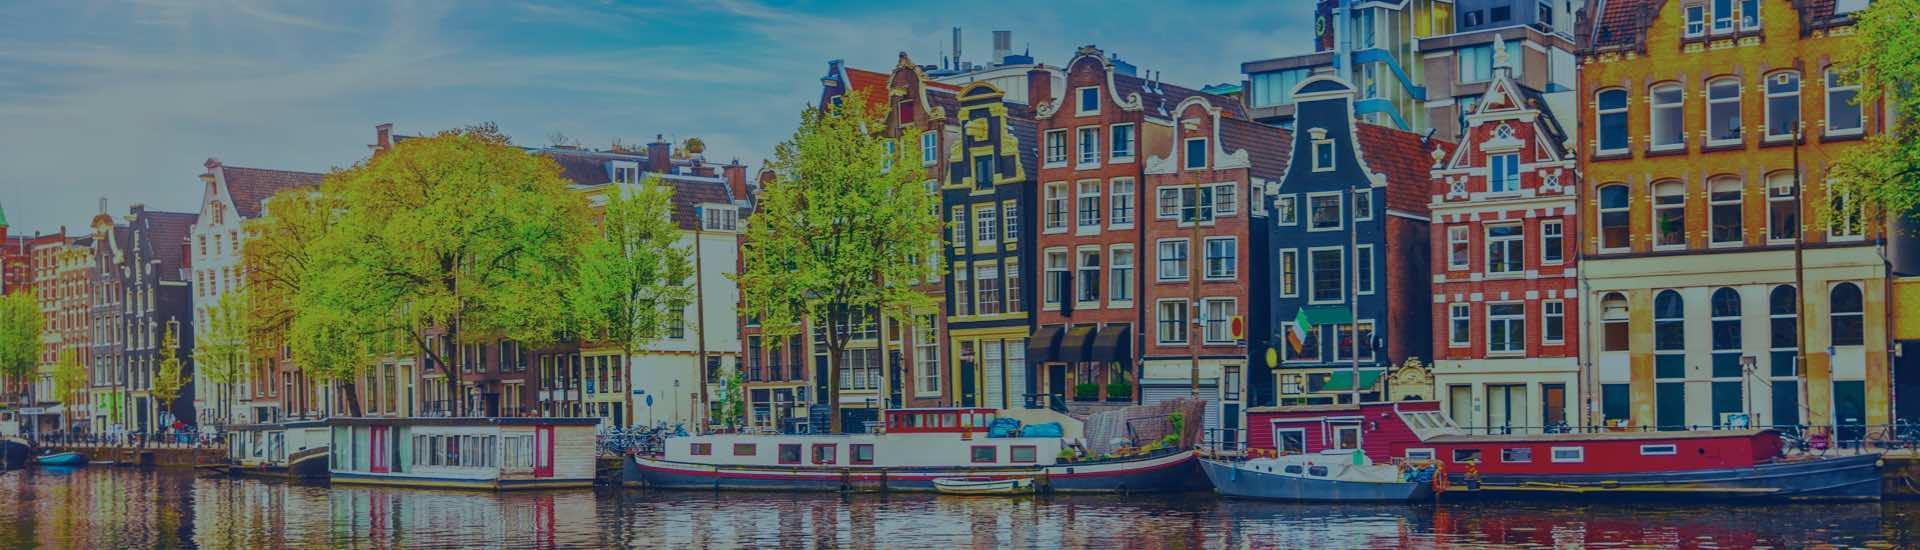 Search Hotels in Amsterdam